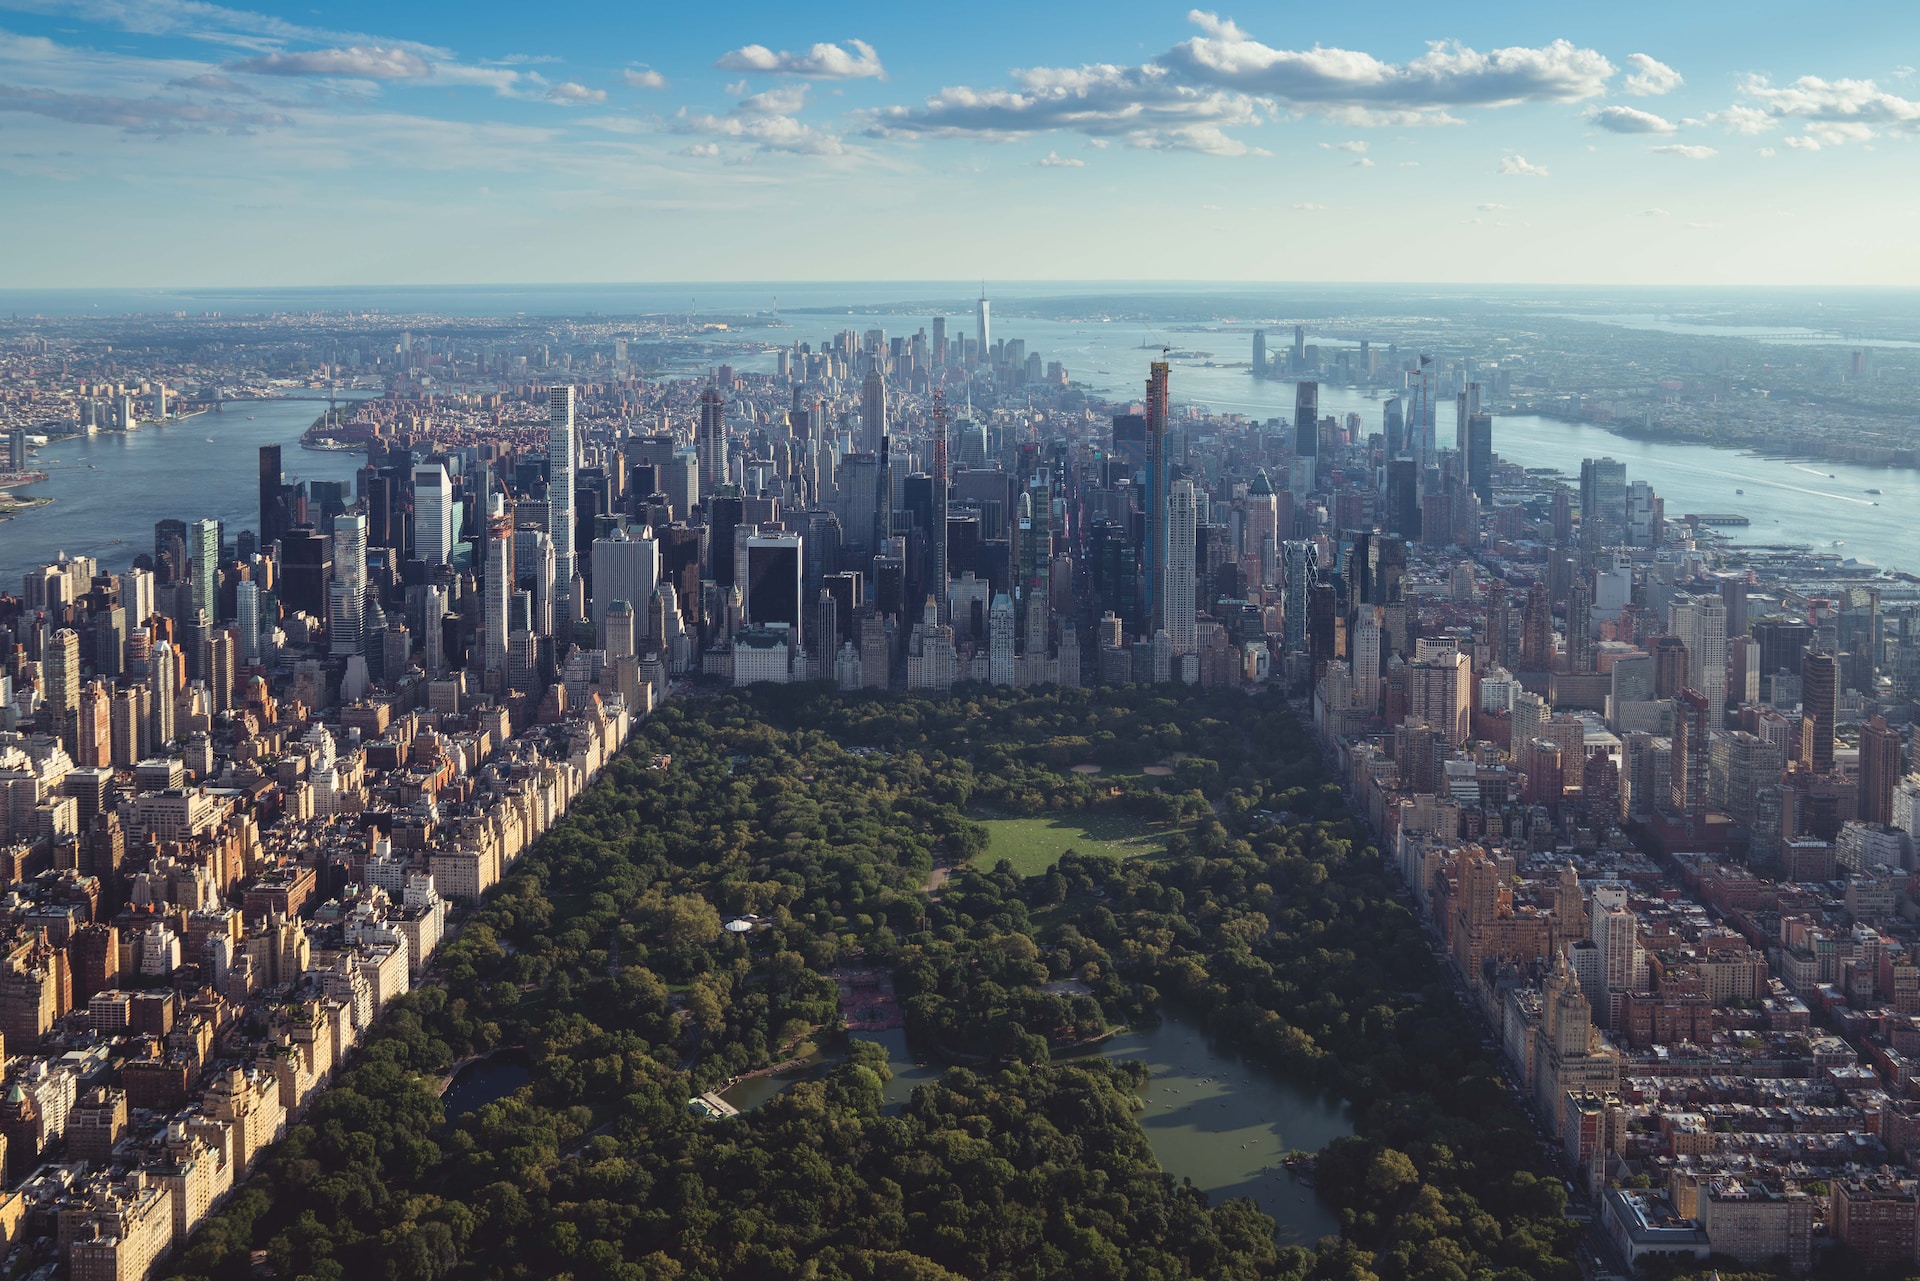 Central Park from air.